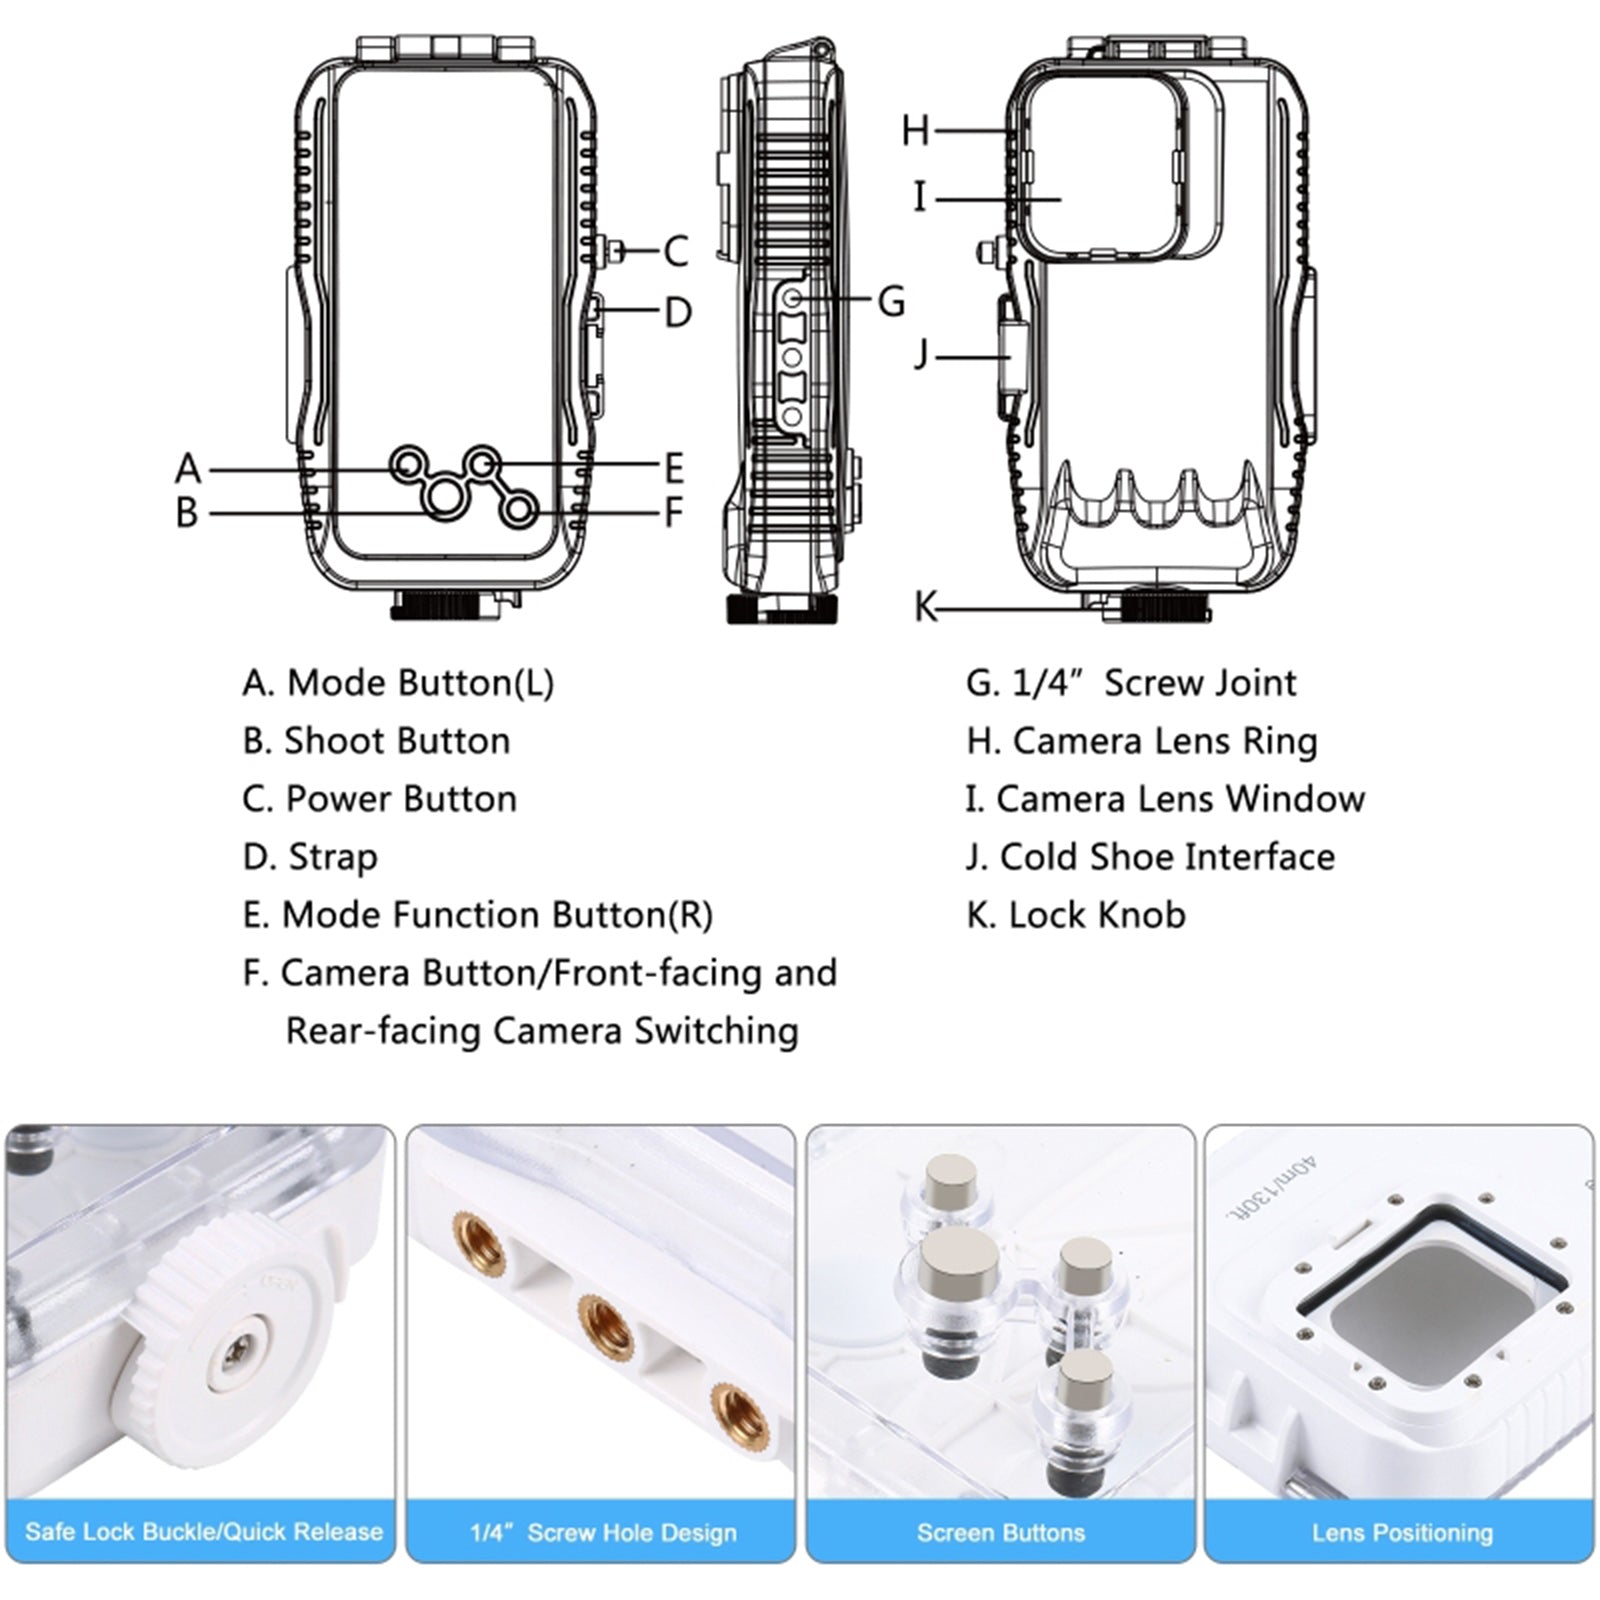 40m Diving Surfing Waterproof  Case Cover for iPhone  PC glass  12 pro max